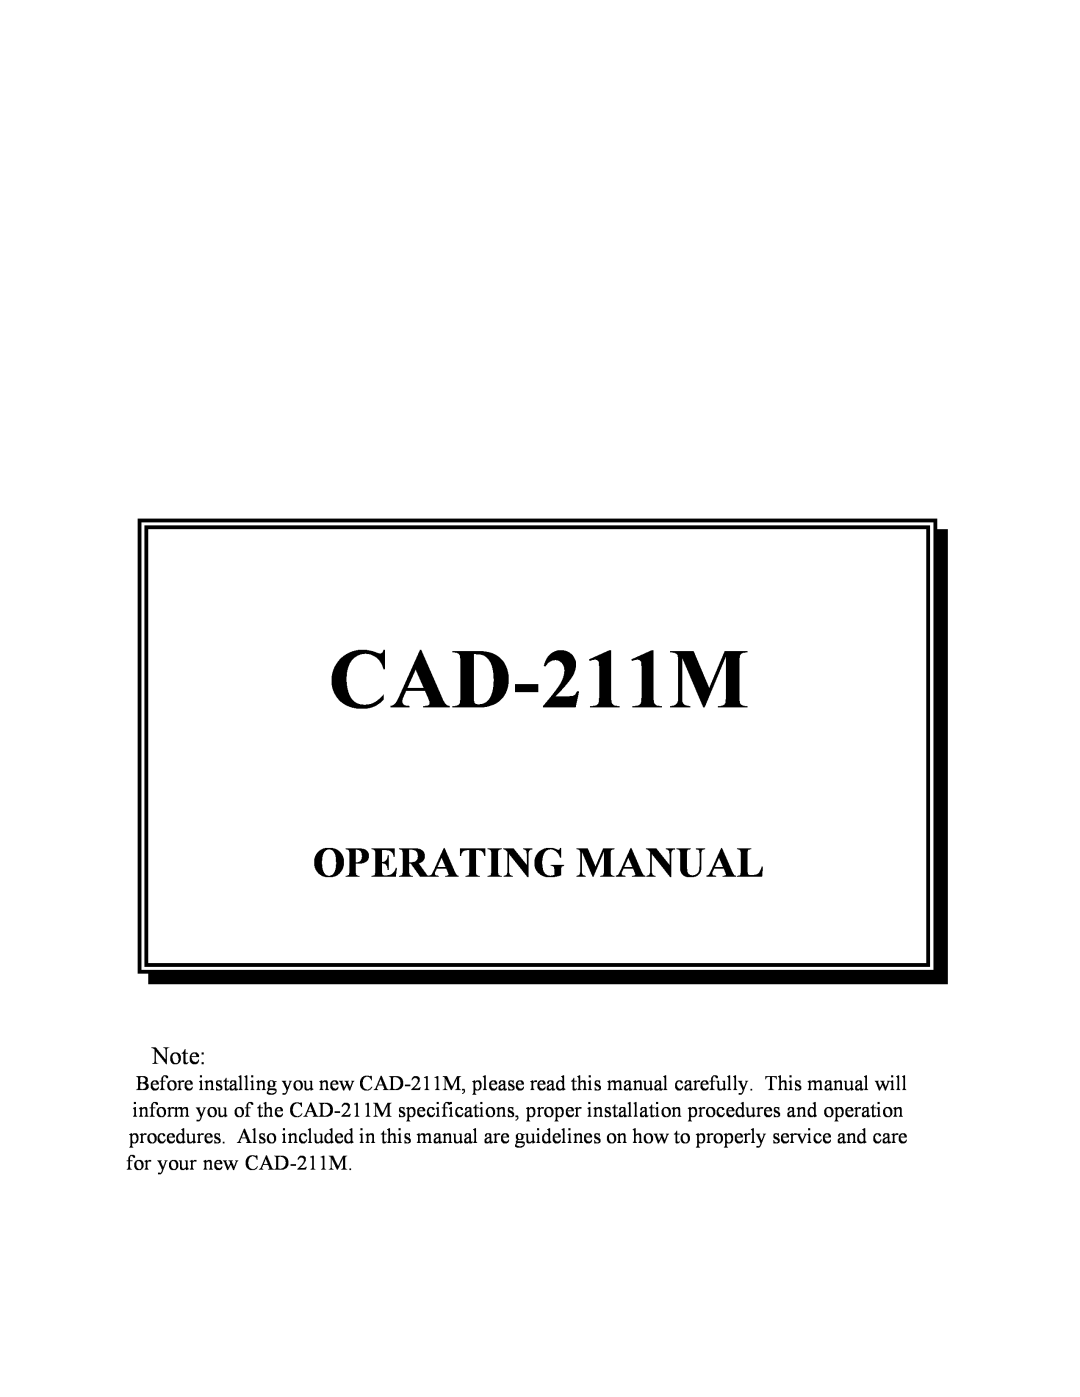 Cary Audio Design CAD-211M specifications Operating Manual 